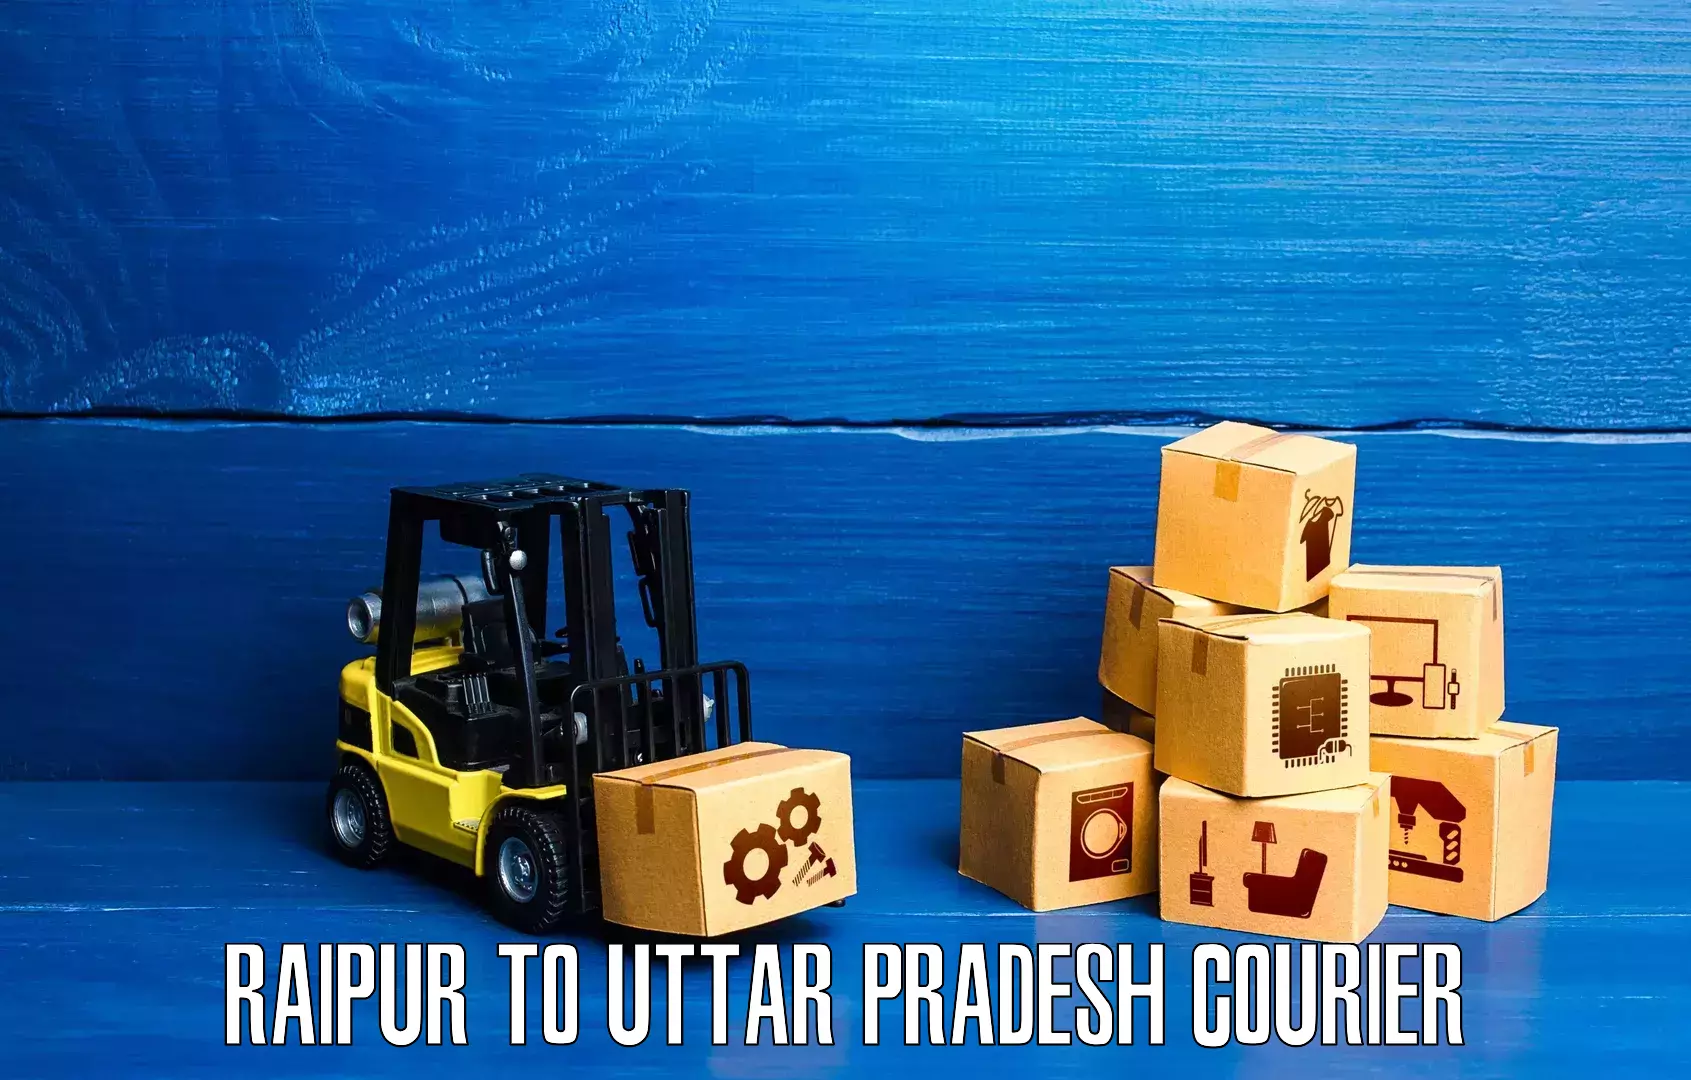 Easy access courier services Raipur to Orai